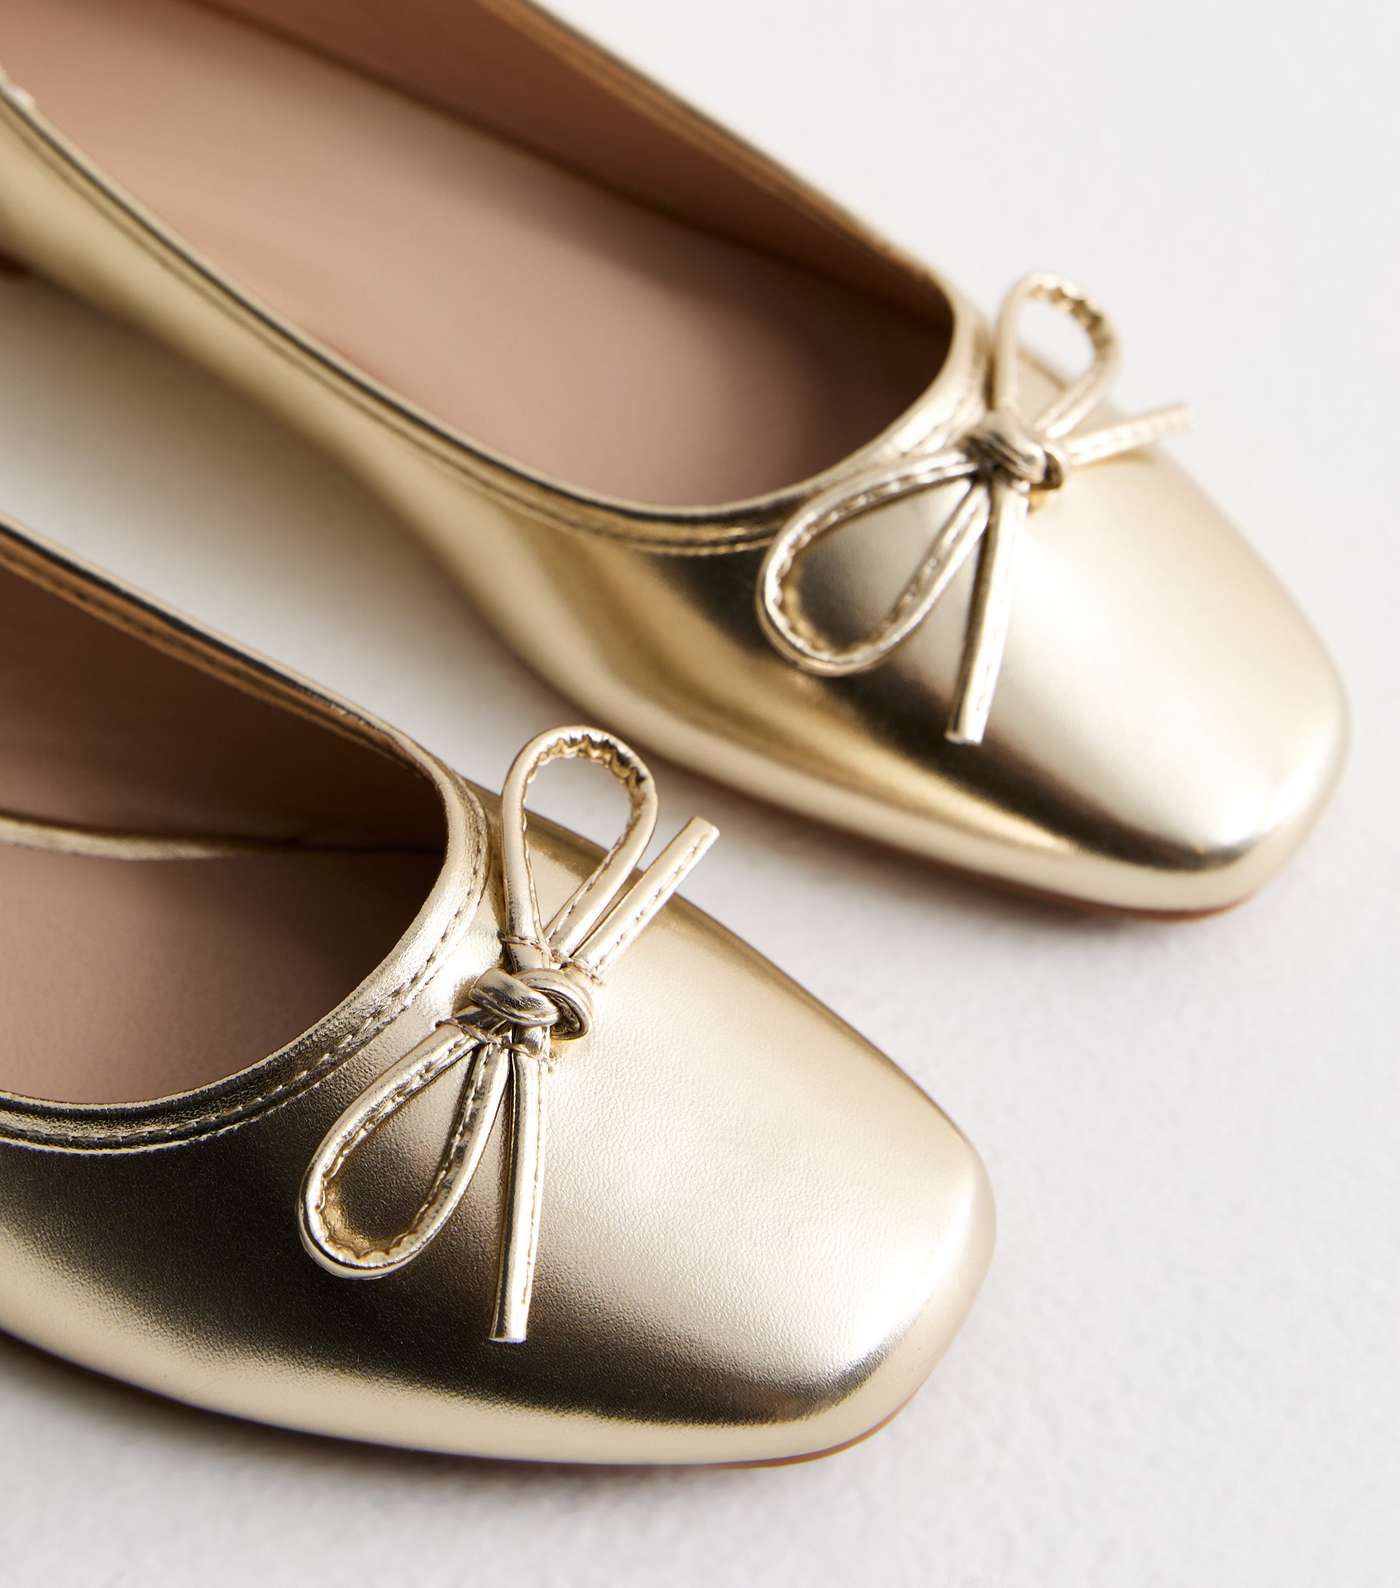 Truffle Gold Leather-Look Bow Ballerina Pumps Image 3